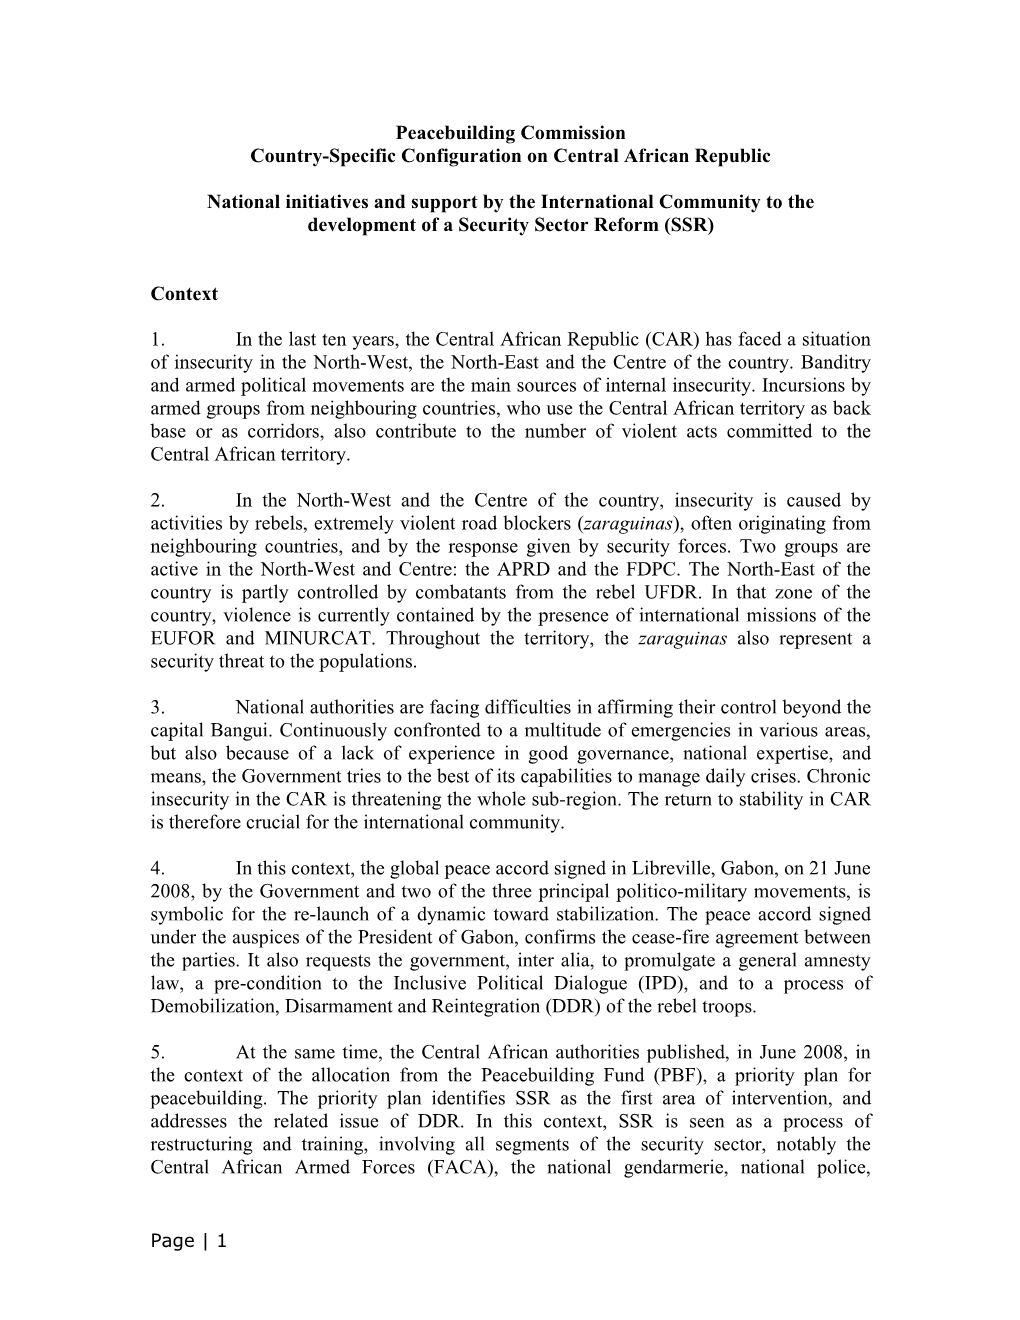 Peacebuilding Commission Country-Specific Configuration on Central African Republic